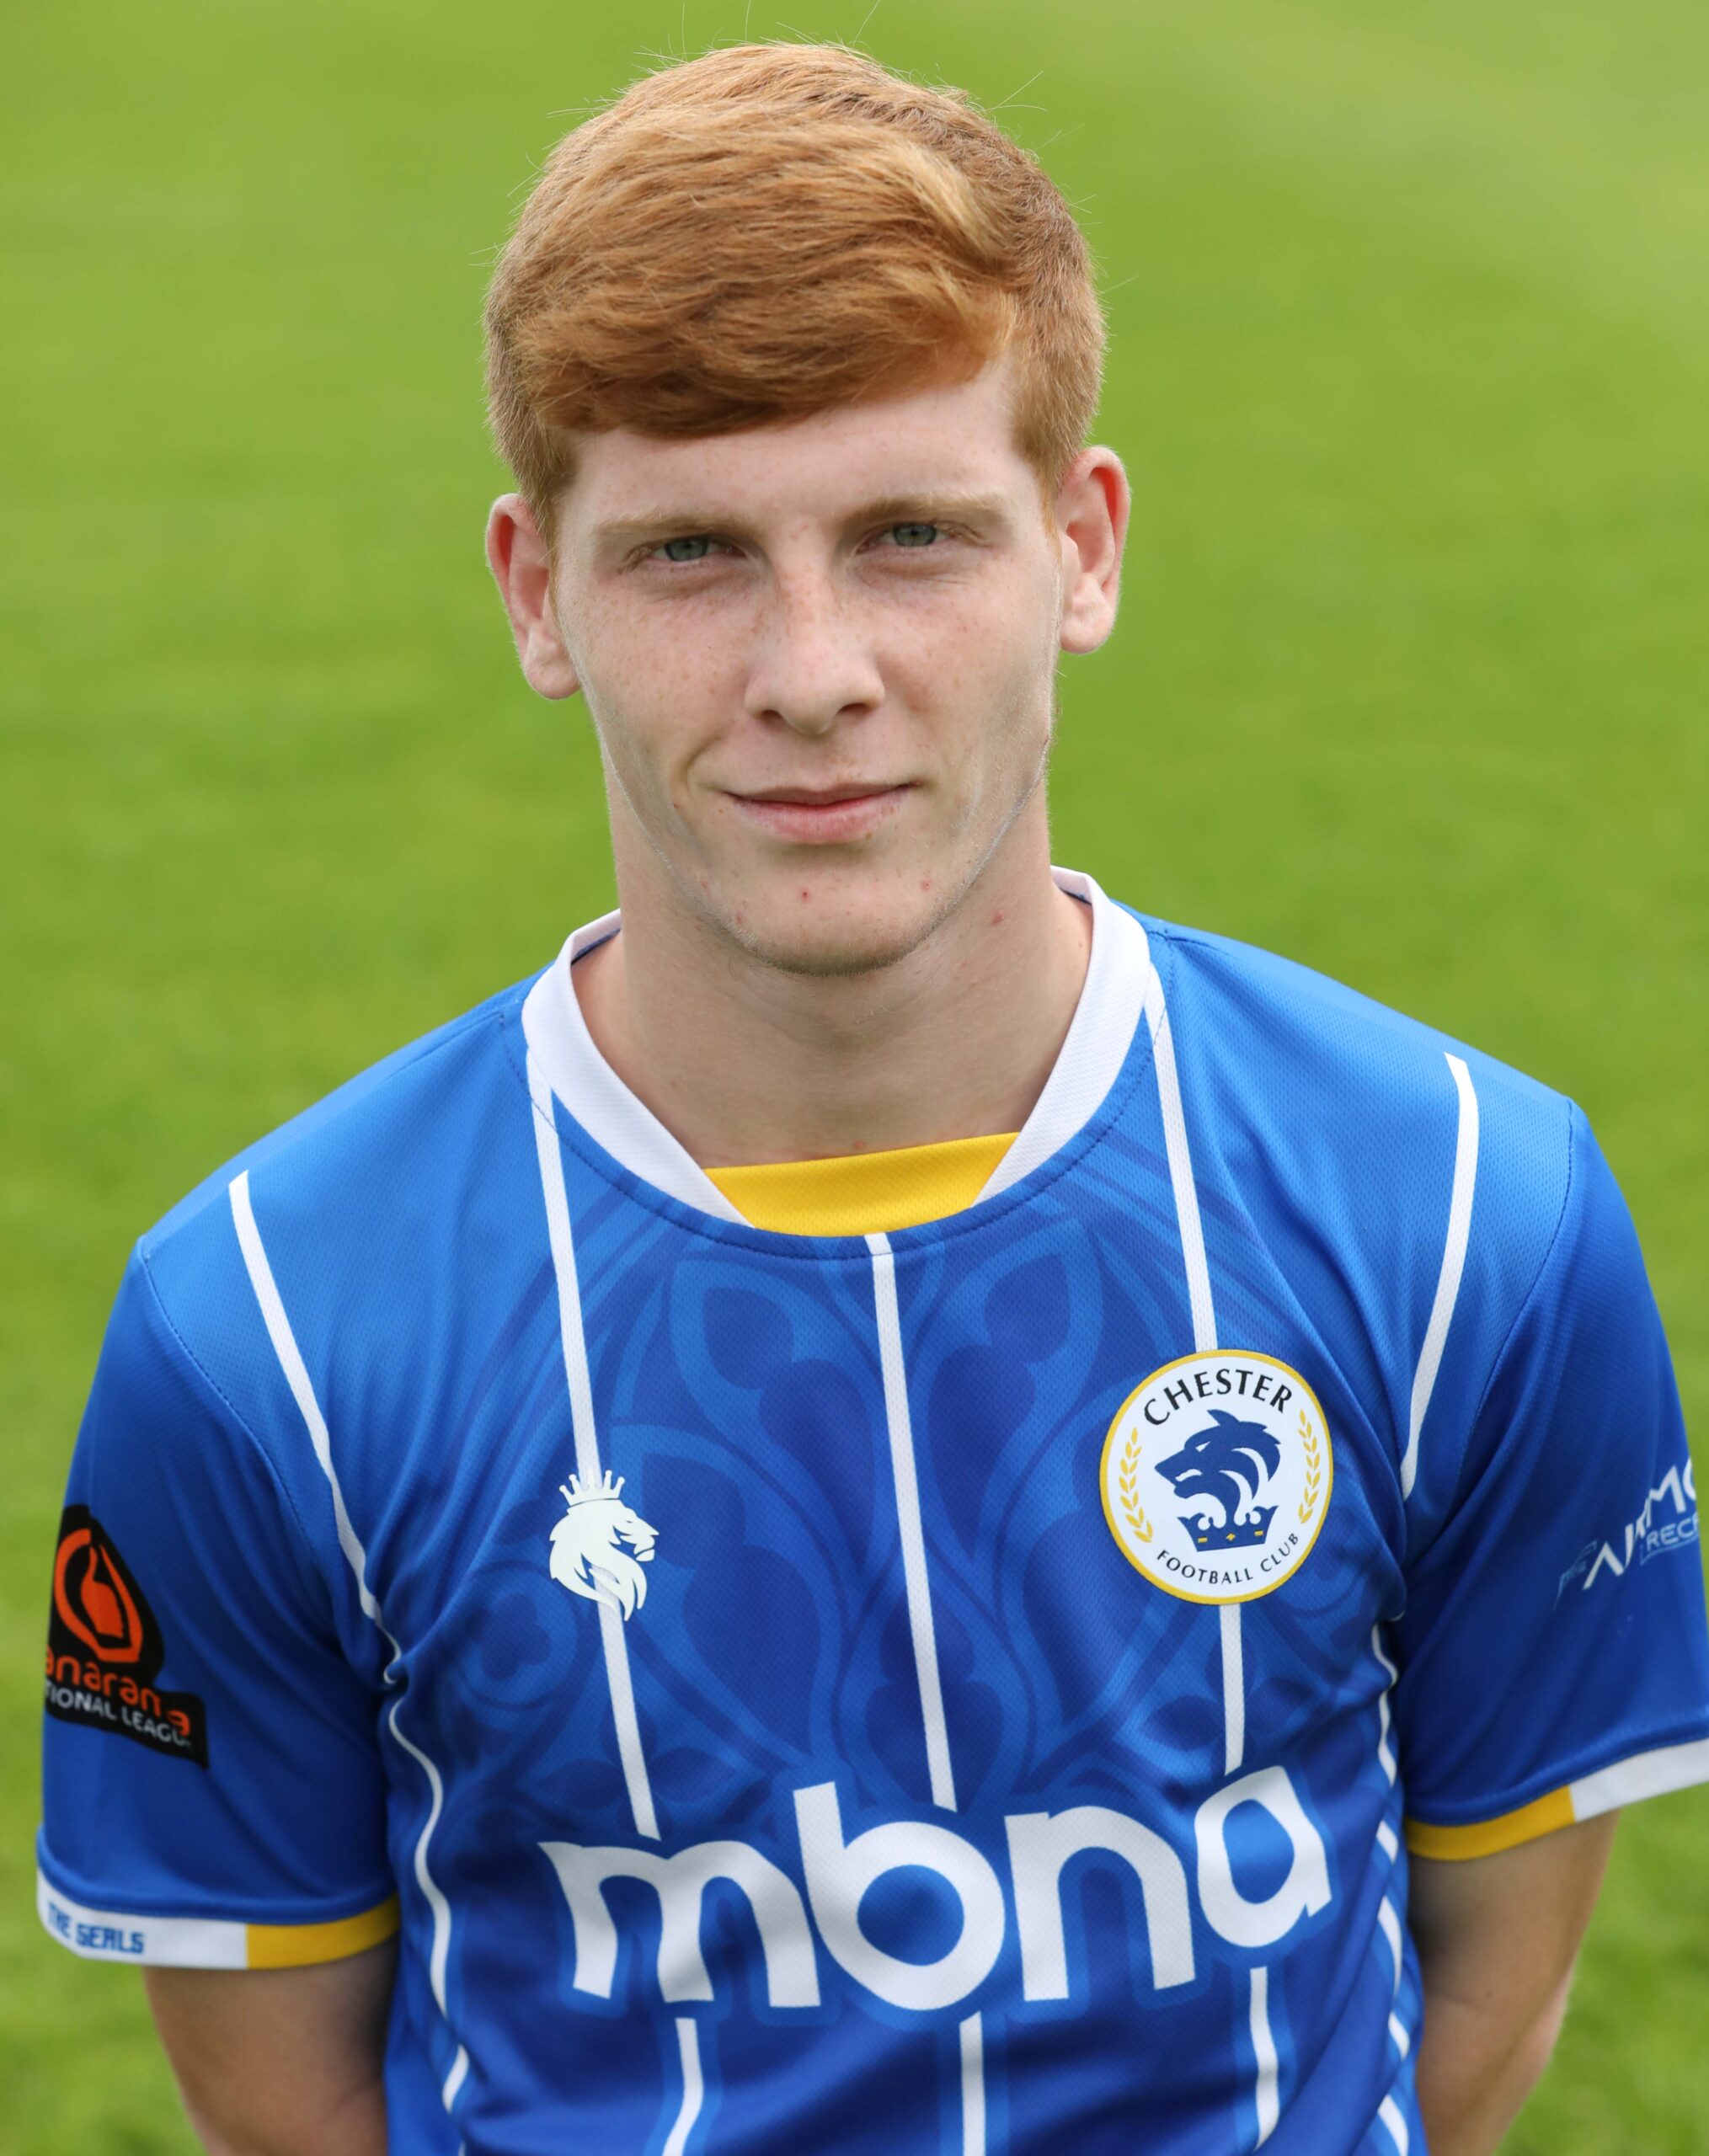 Reece Daly - Chester Football Club